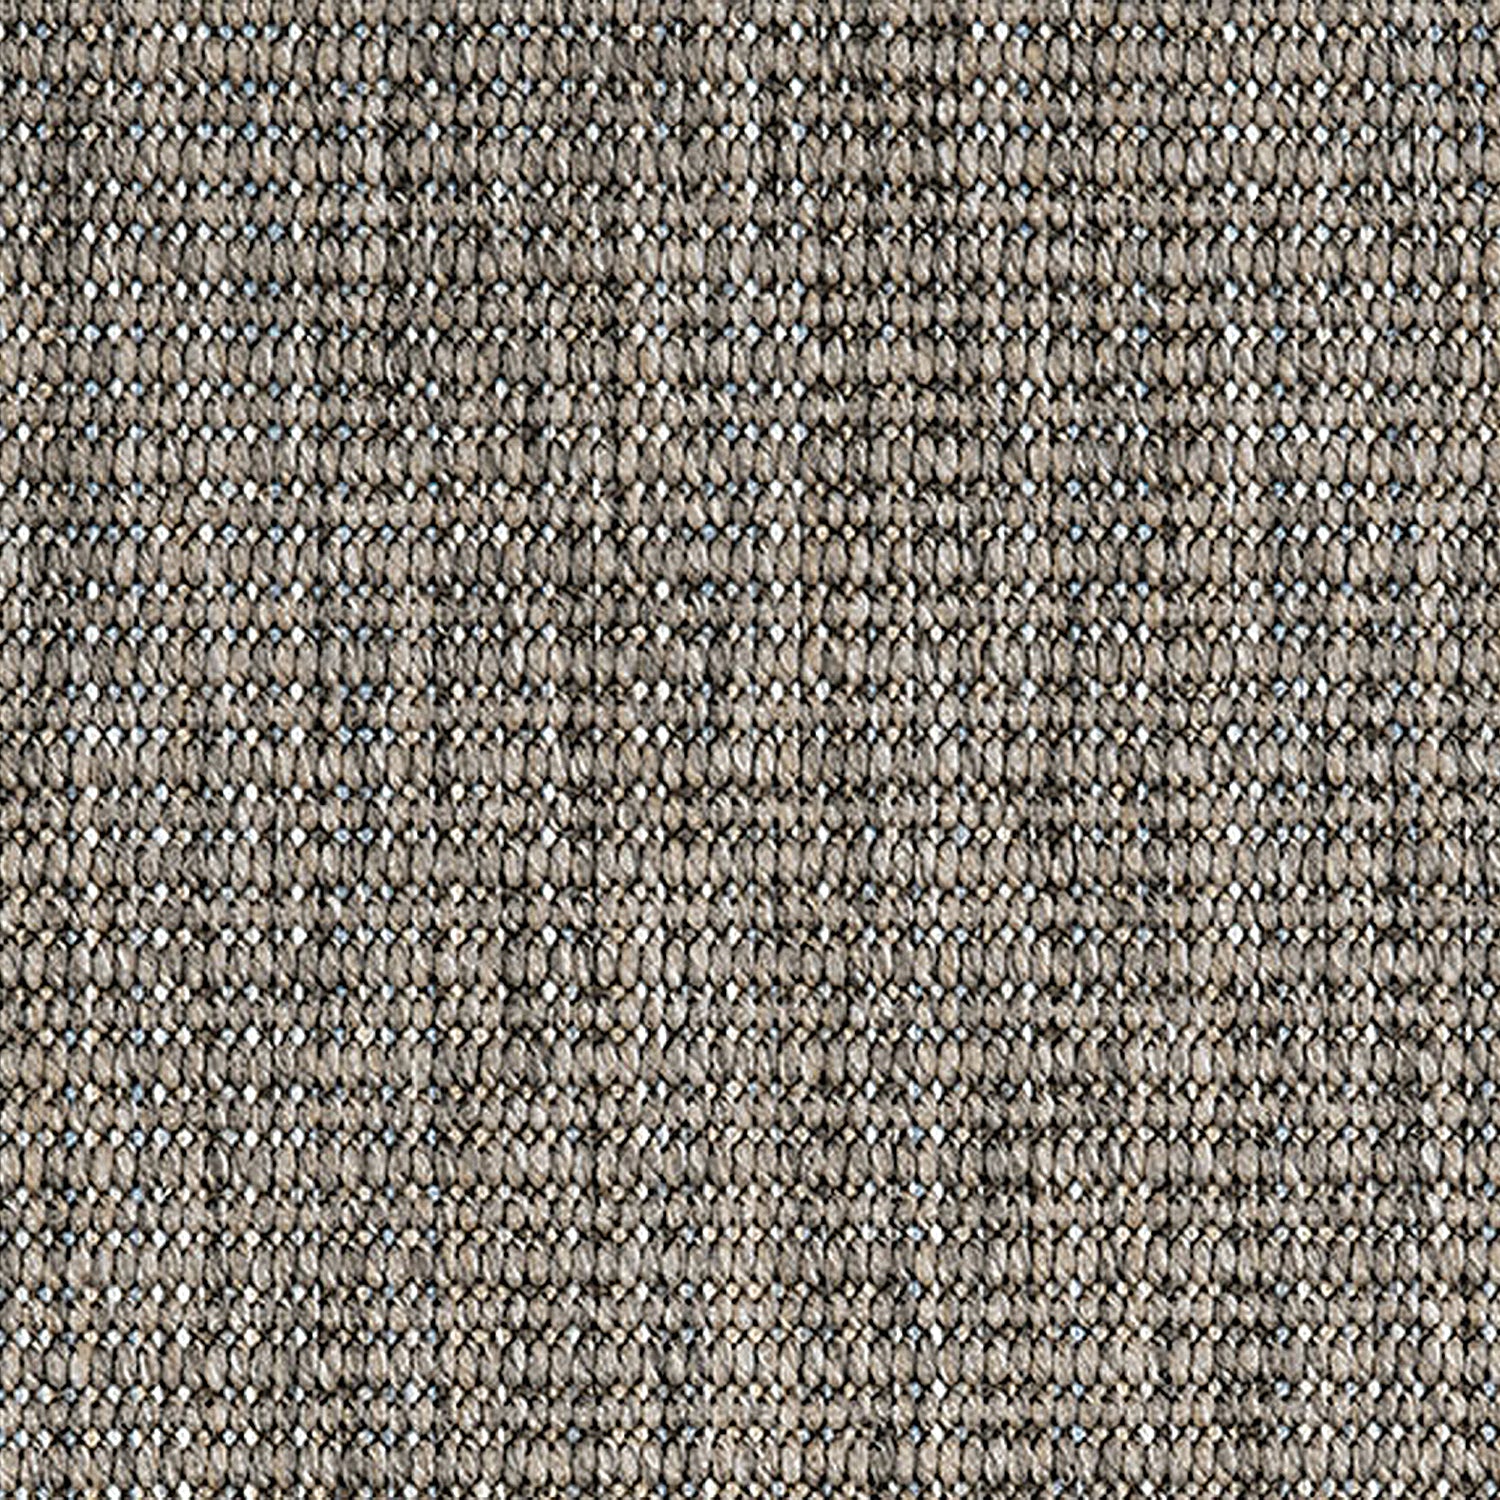 Outdoor broadloom carpet swatch in a textured stripe weave in tan and brown.